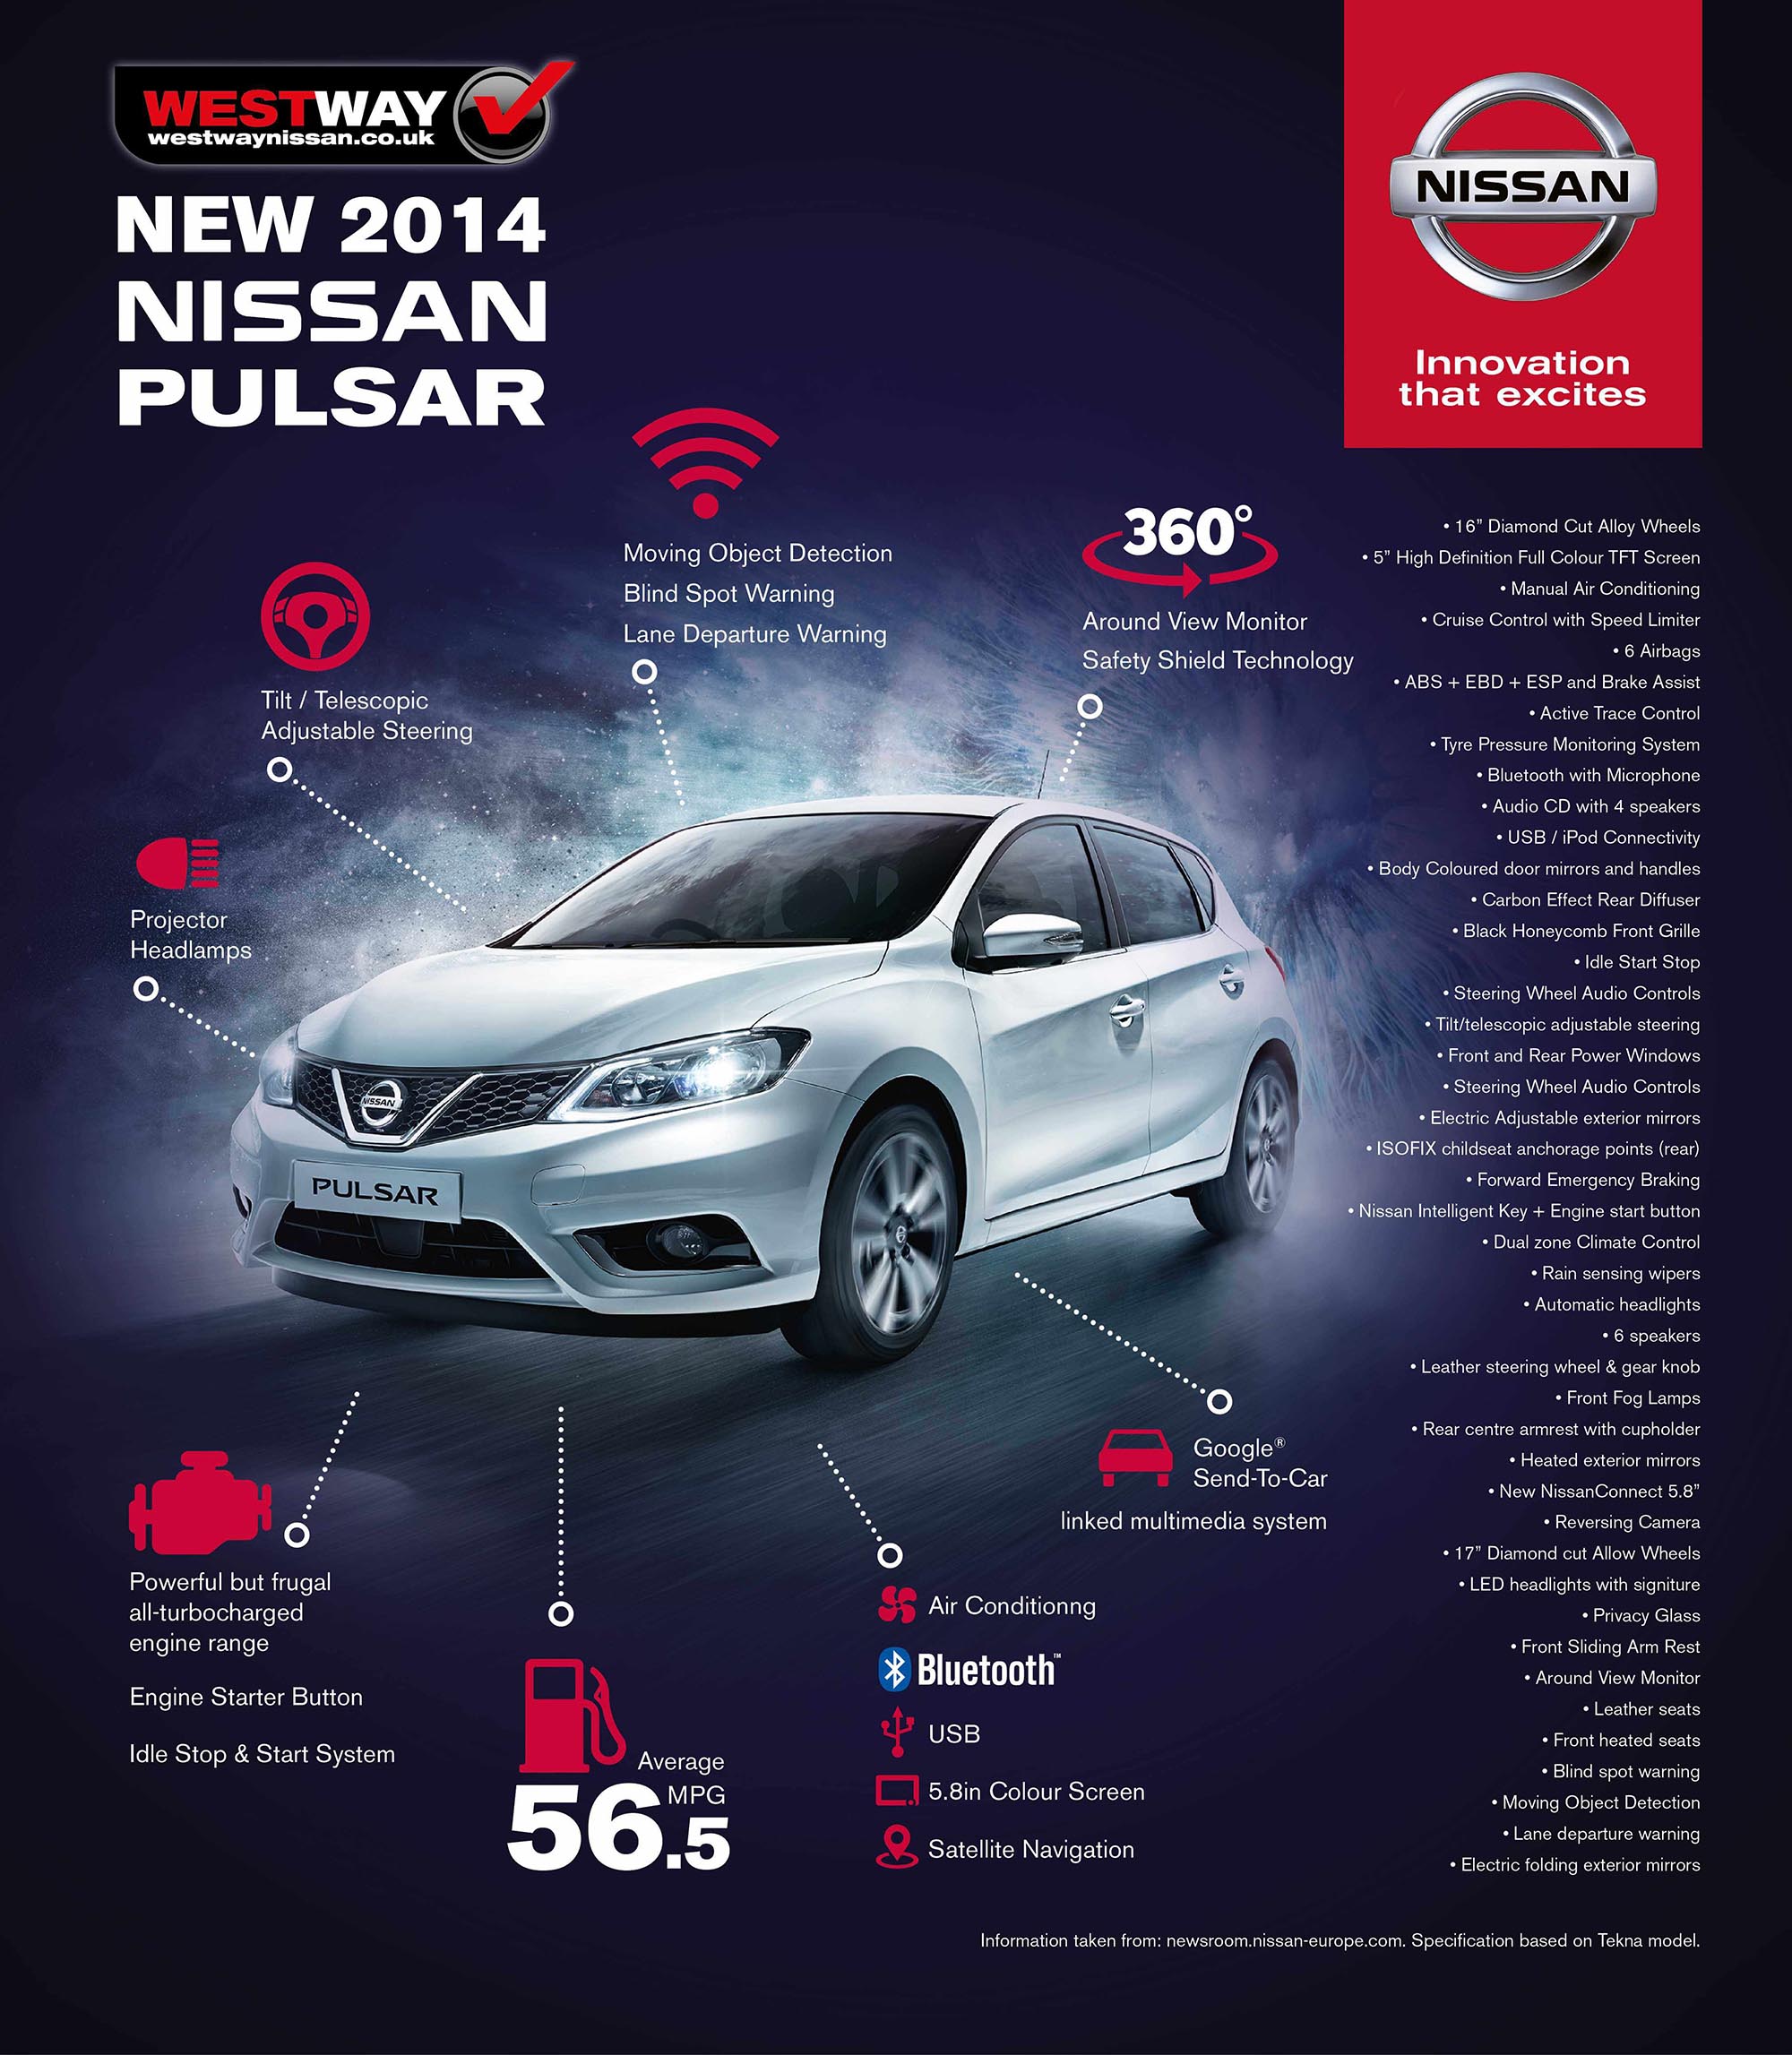 Have you seen The New Nissan Pulsar?   